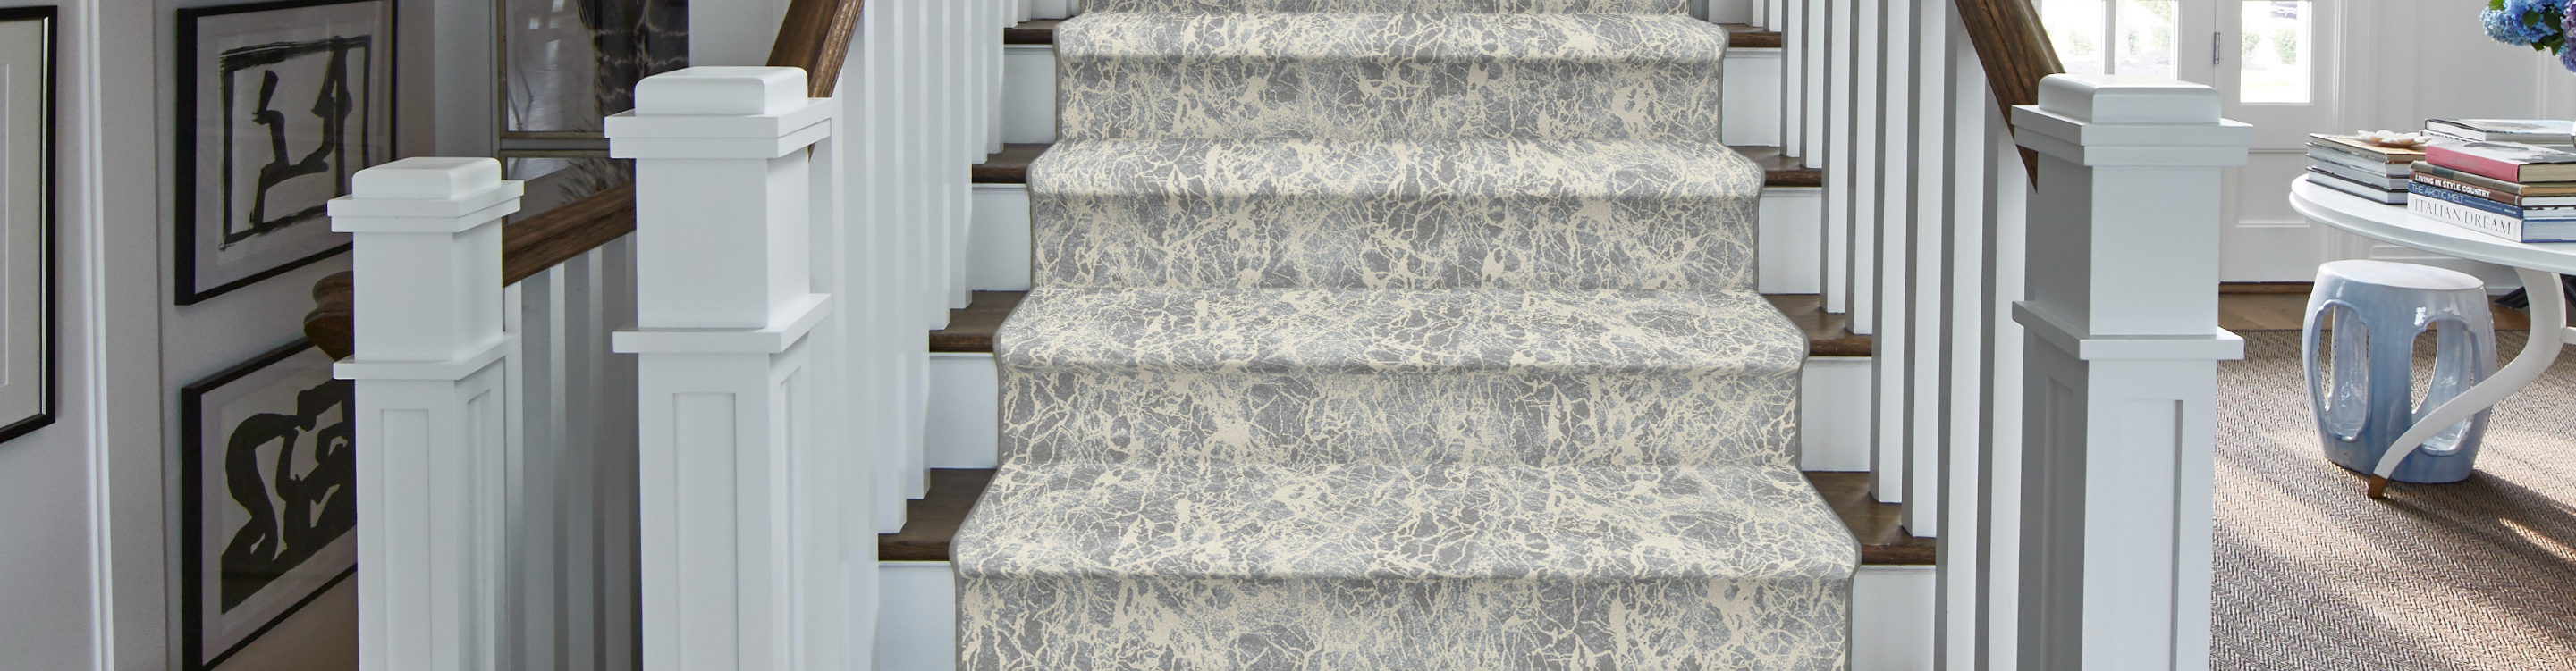 white and gray patterned stair runner in living area